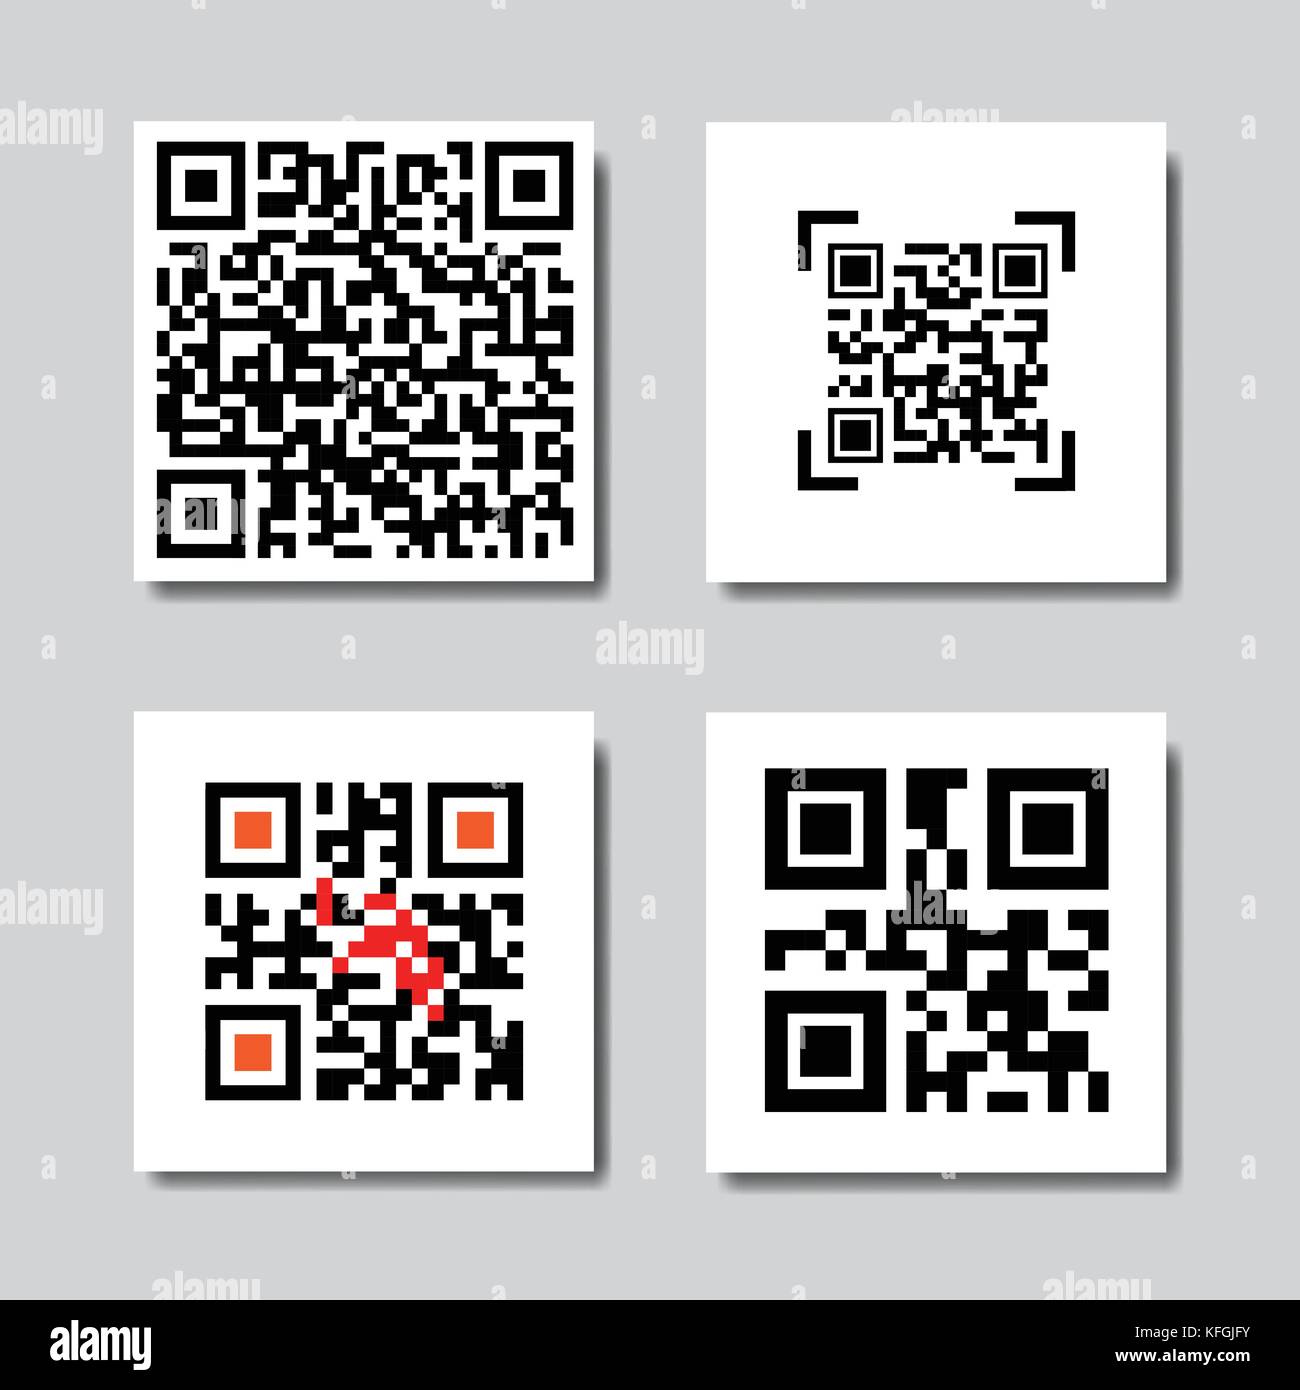 Set Of Sample Qr Codes For Smartphone Scanning Icons Stock Vector